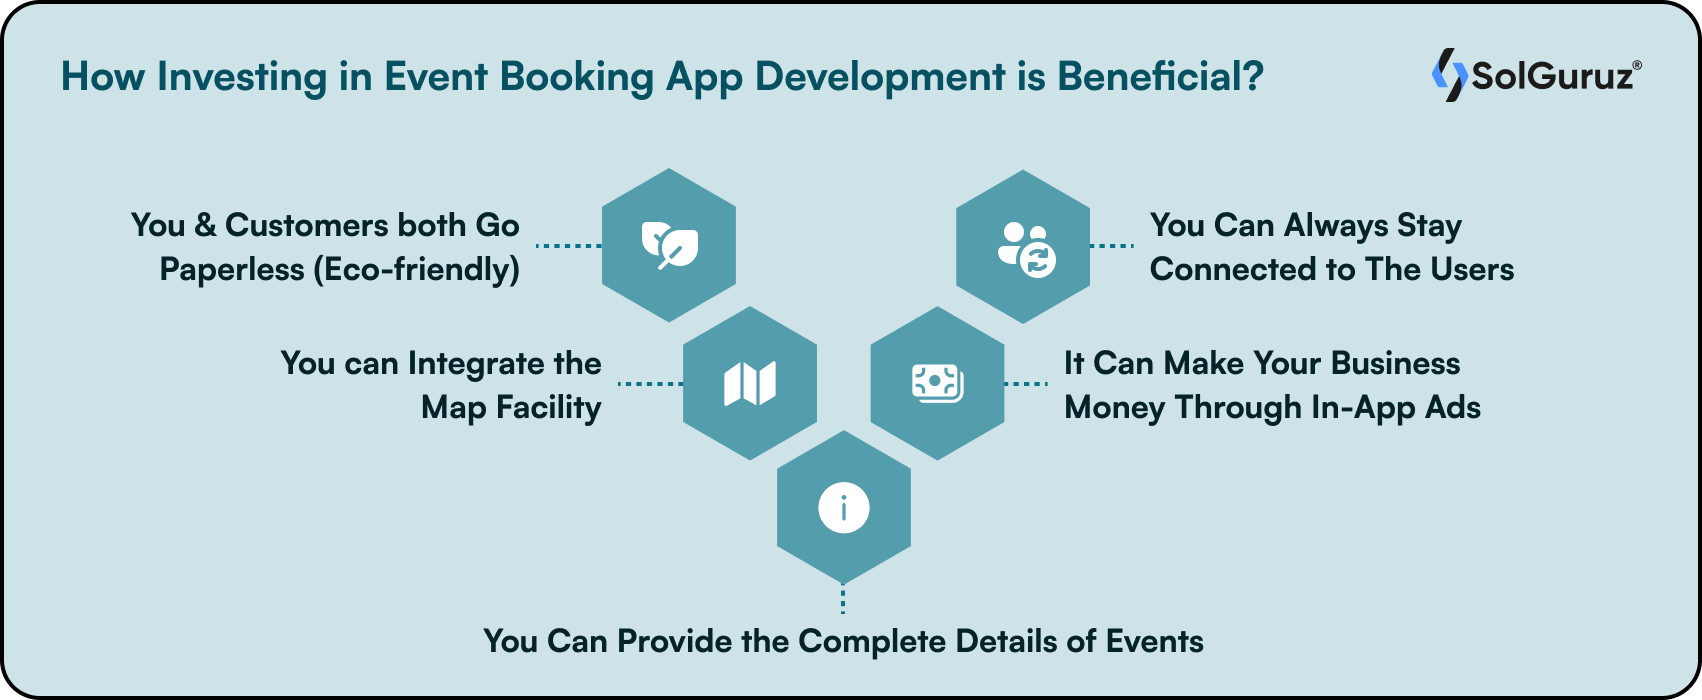 How Investing in Event Booking App Development is Beneficial